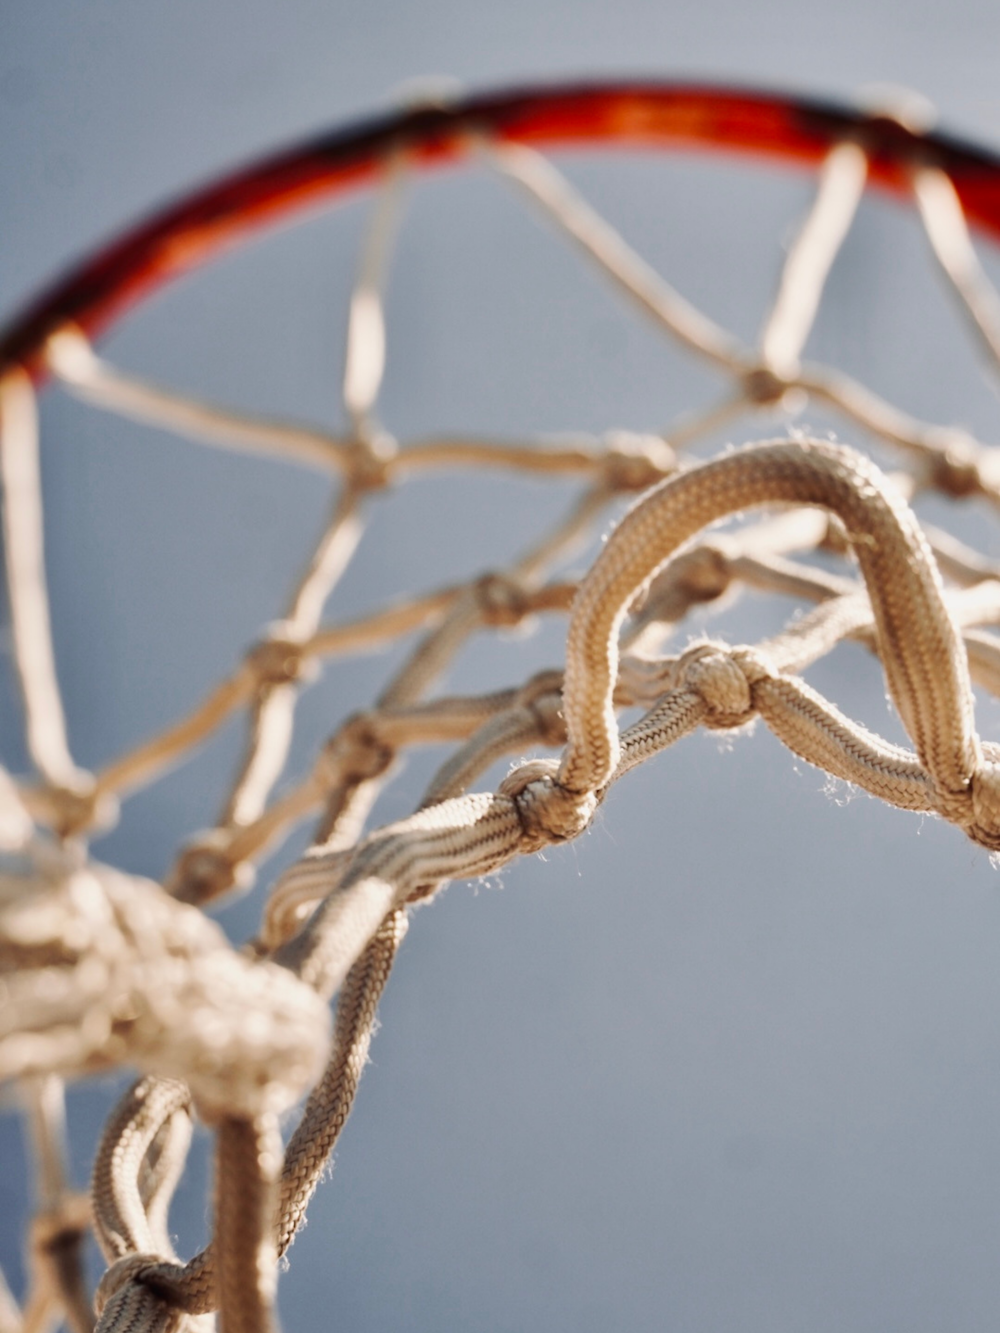 a close up of a basketball net with a blue sky in the background